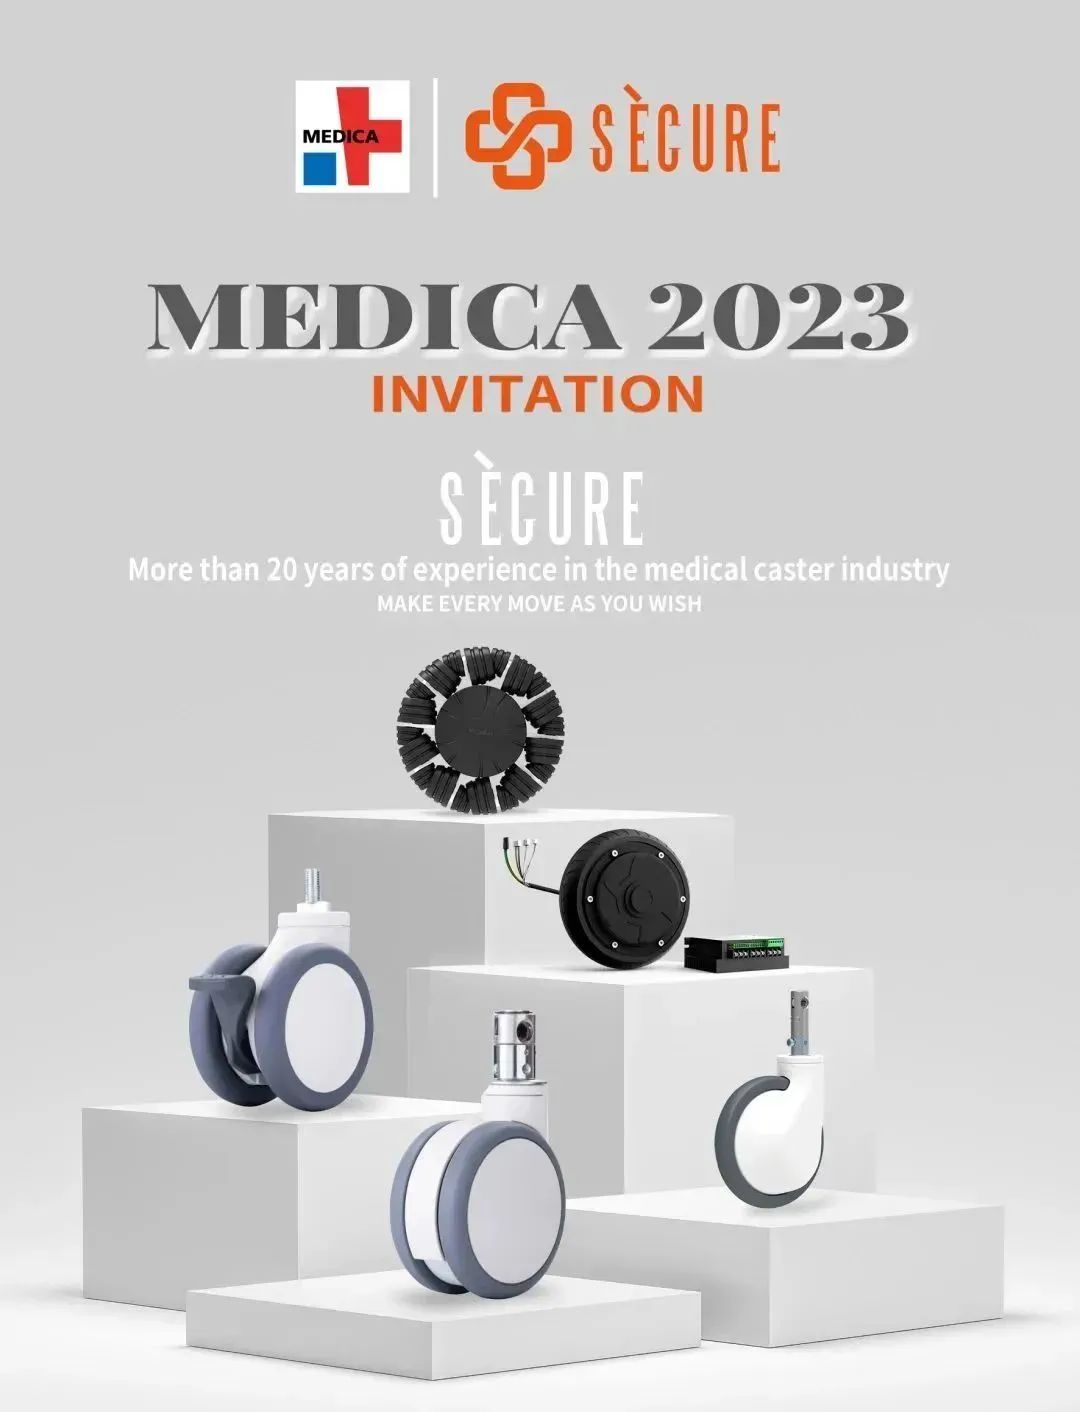 SECURE at MEDICA 2023 with increasing overseas influence